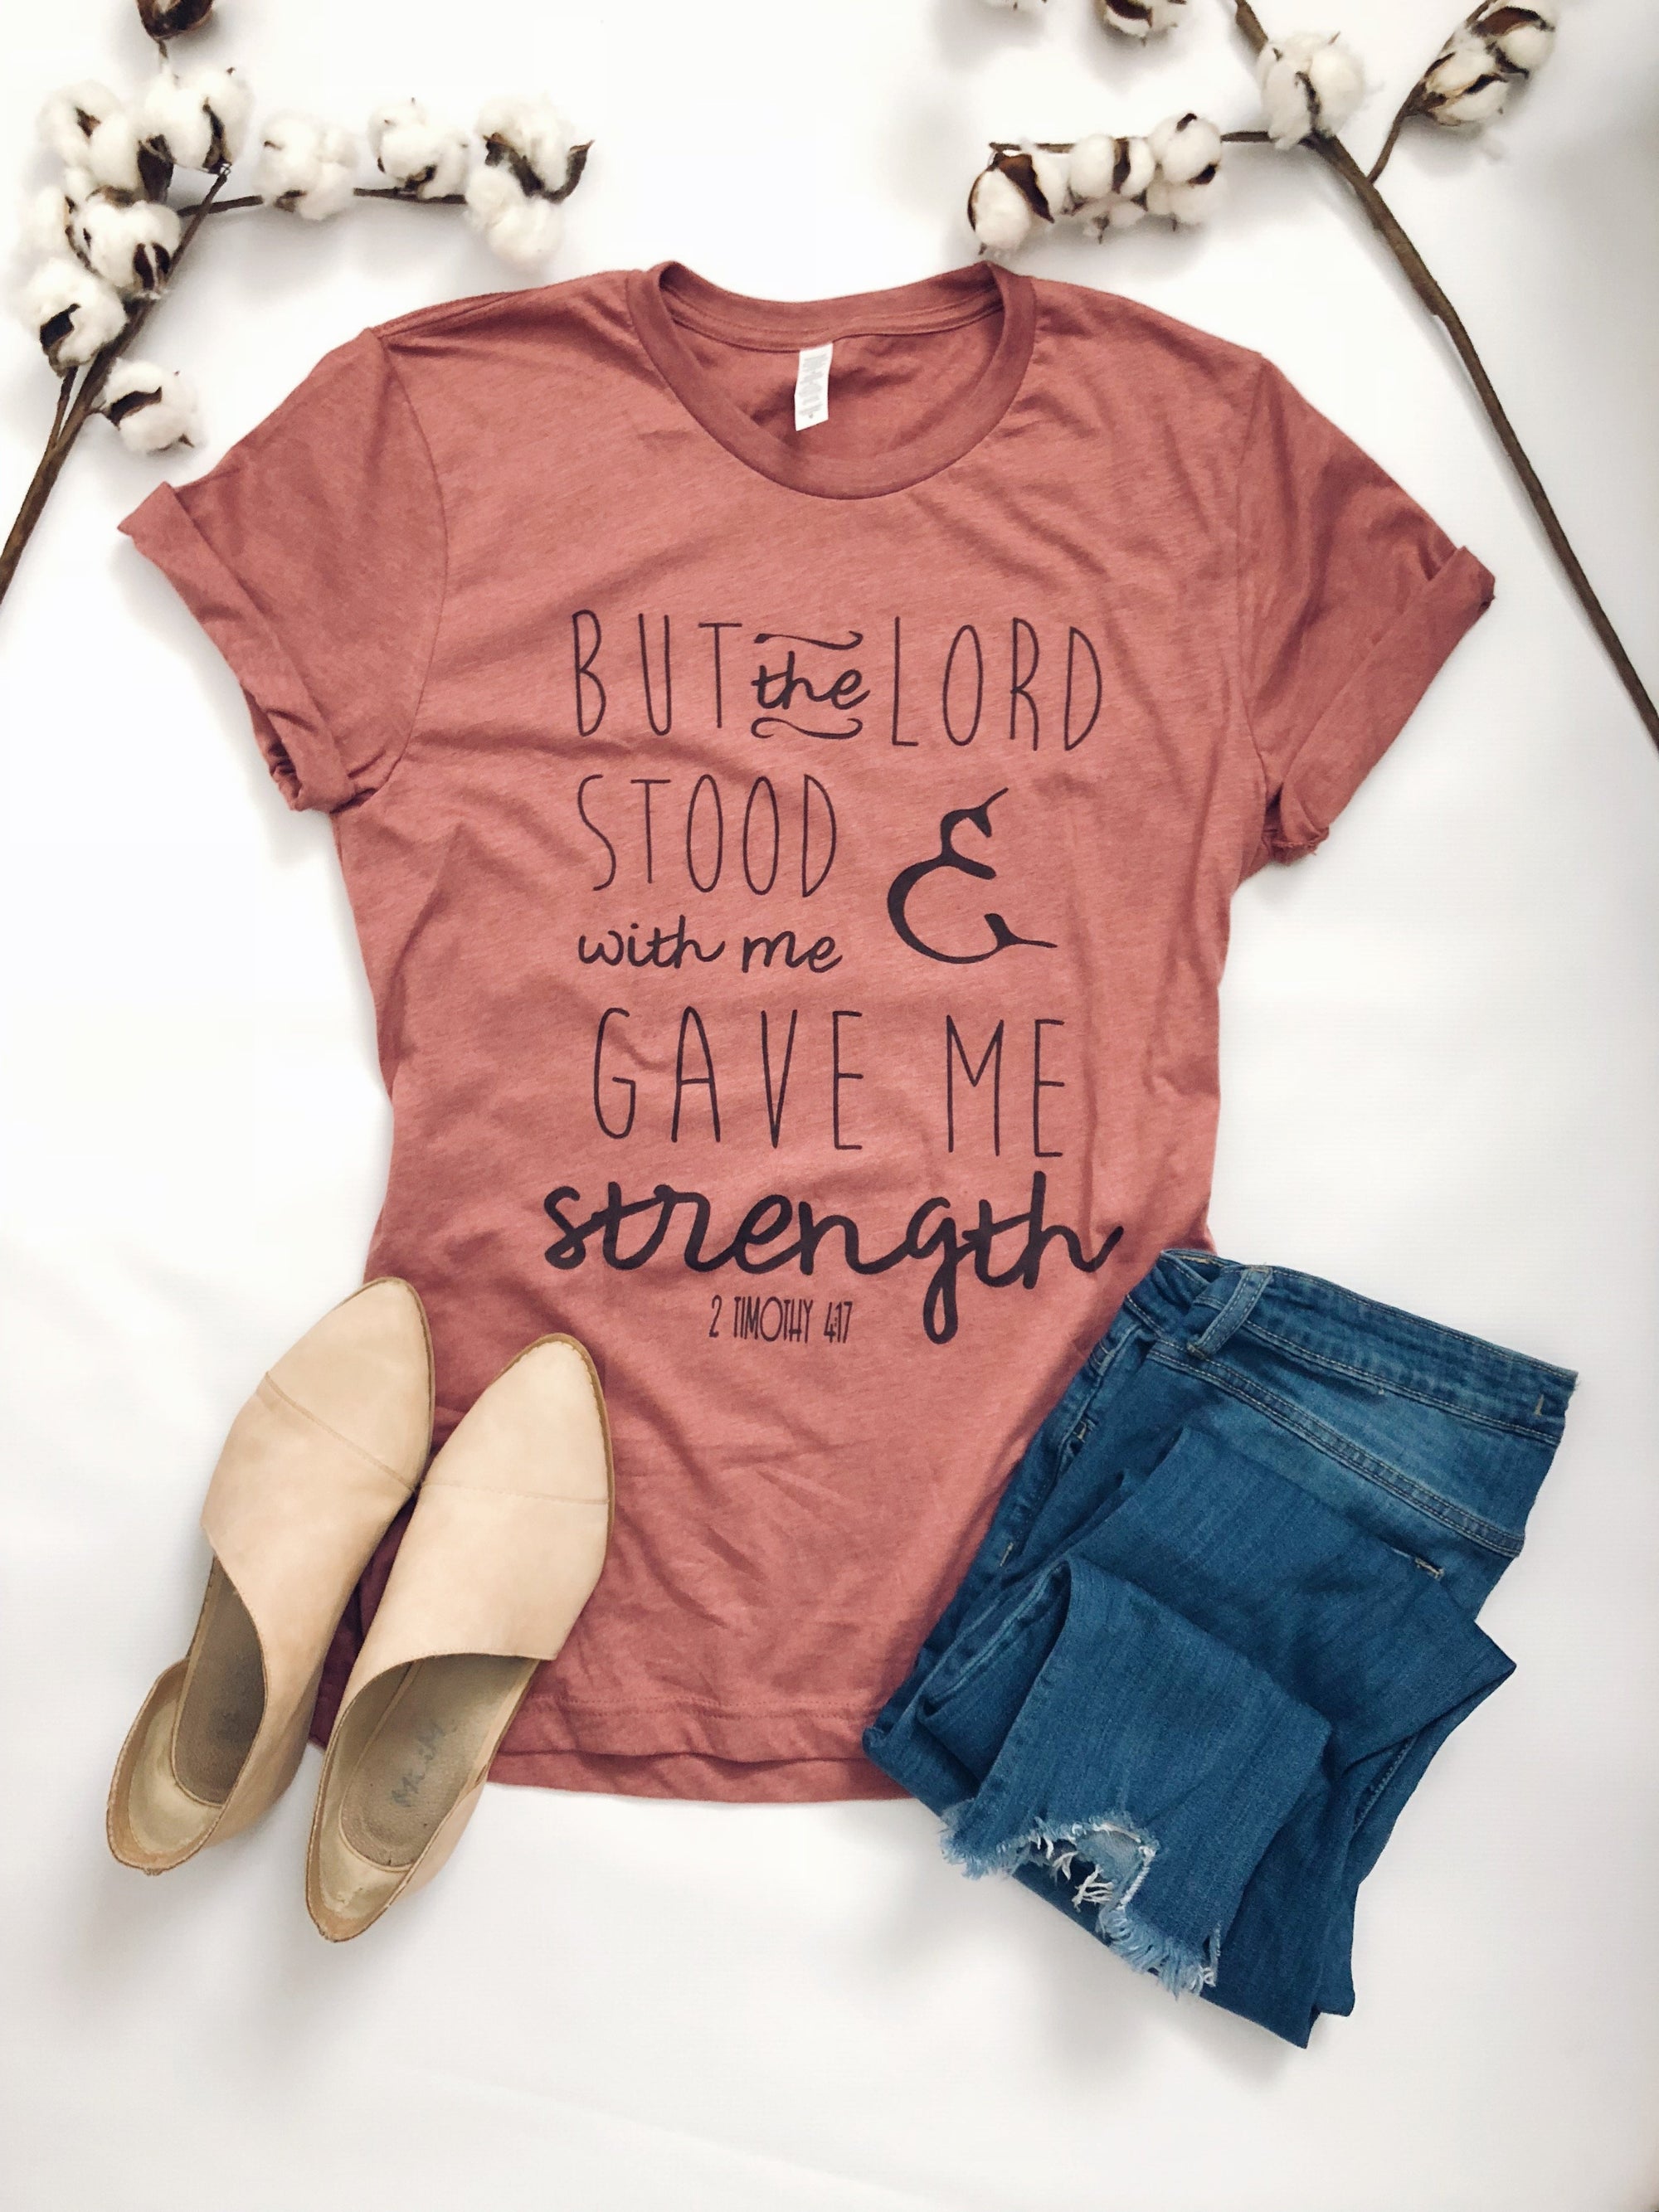 But the Lord stood with me Short sleeve miscellaneous tee Bella Canvas 3001 heather dusty blue XS Ice blue 